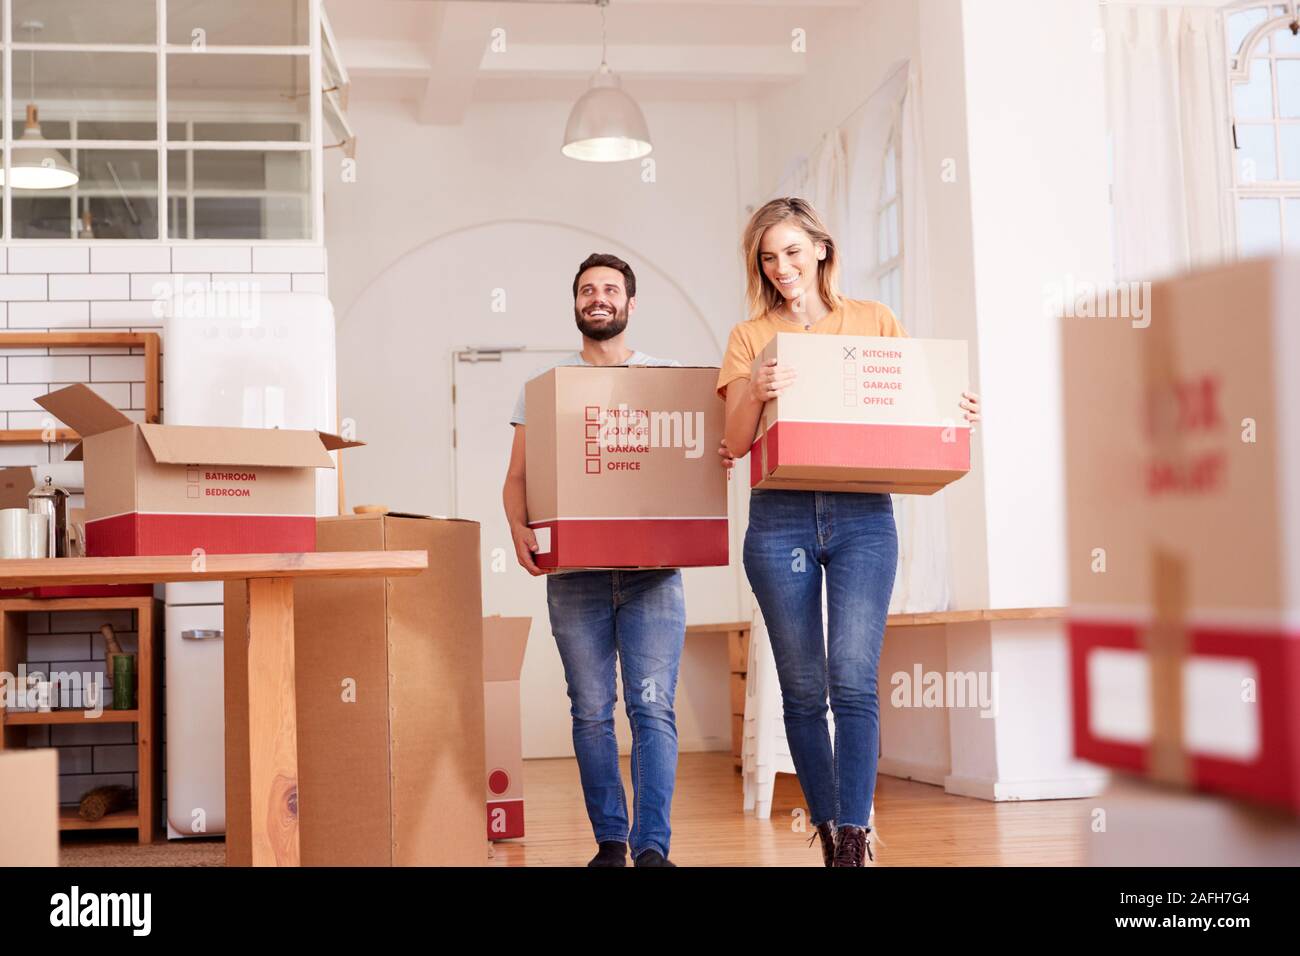 Smiling Couple Carrying Boxes Into New Home On Moving Day Stock Photo